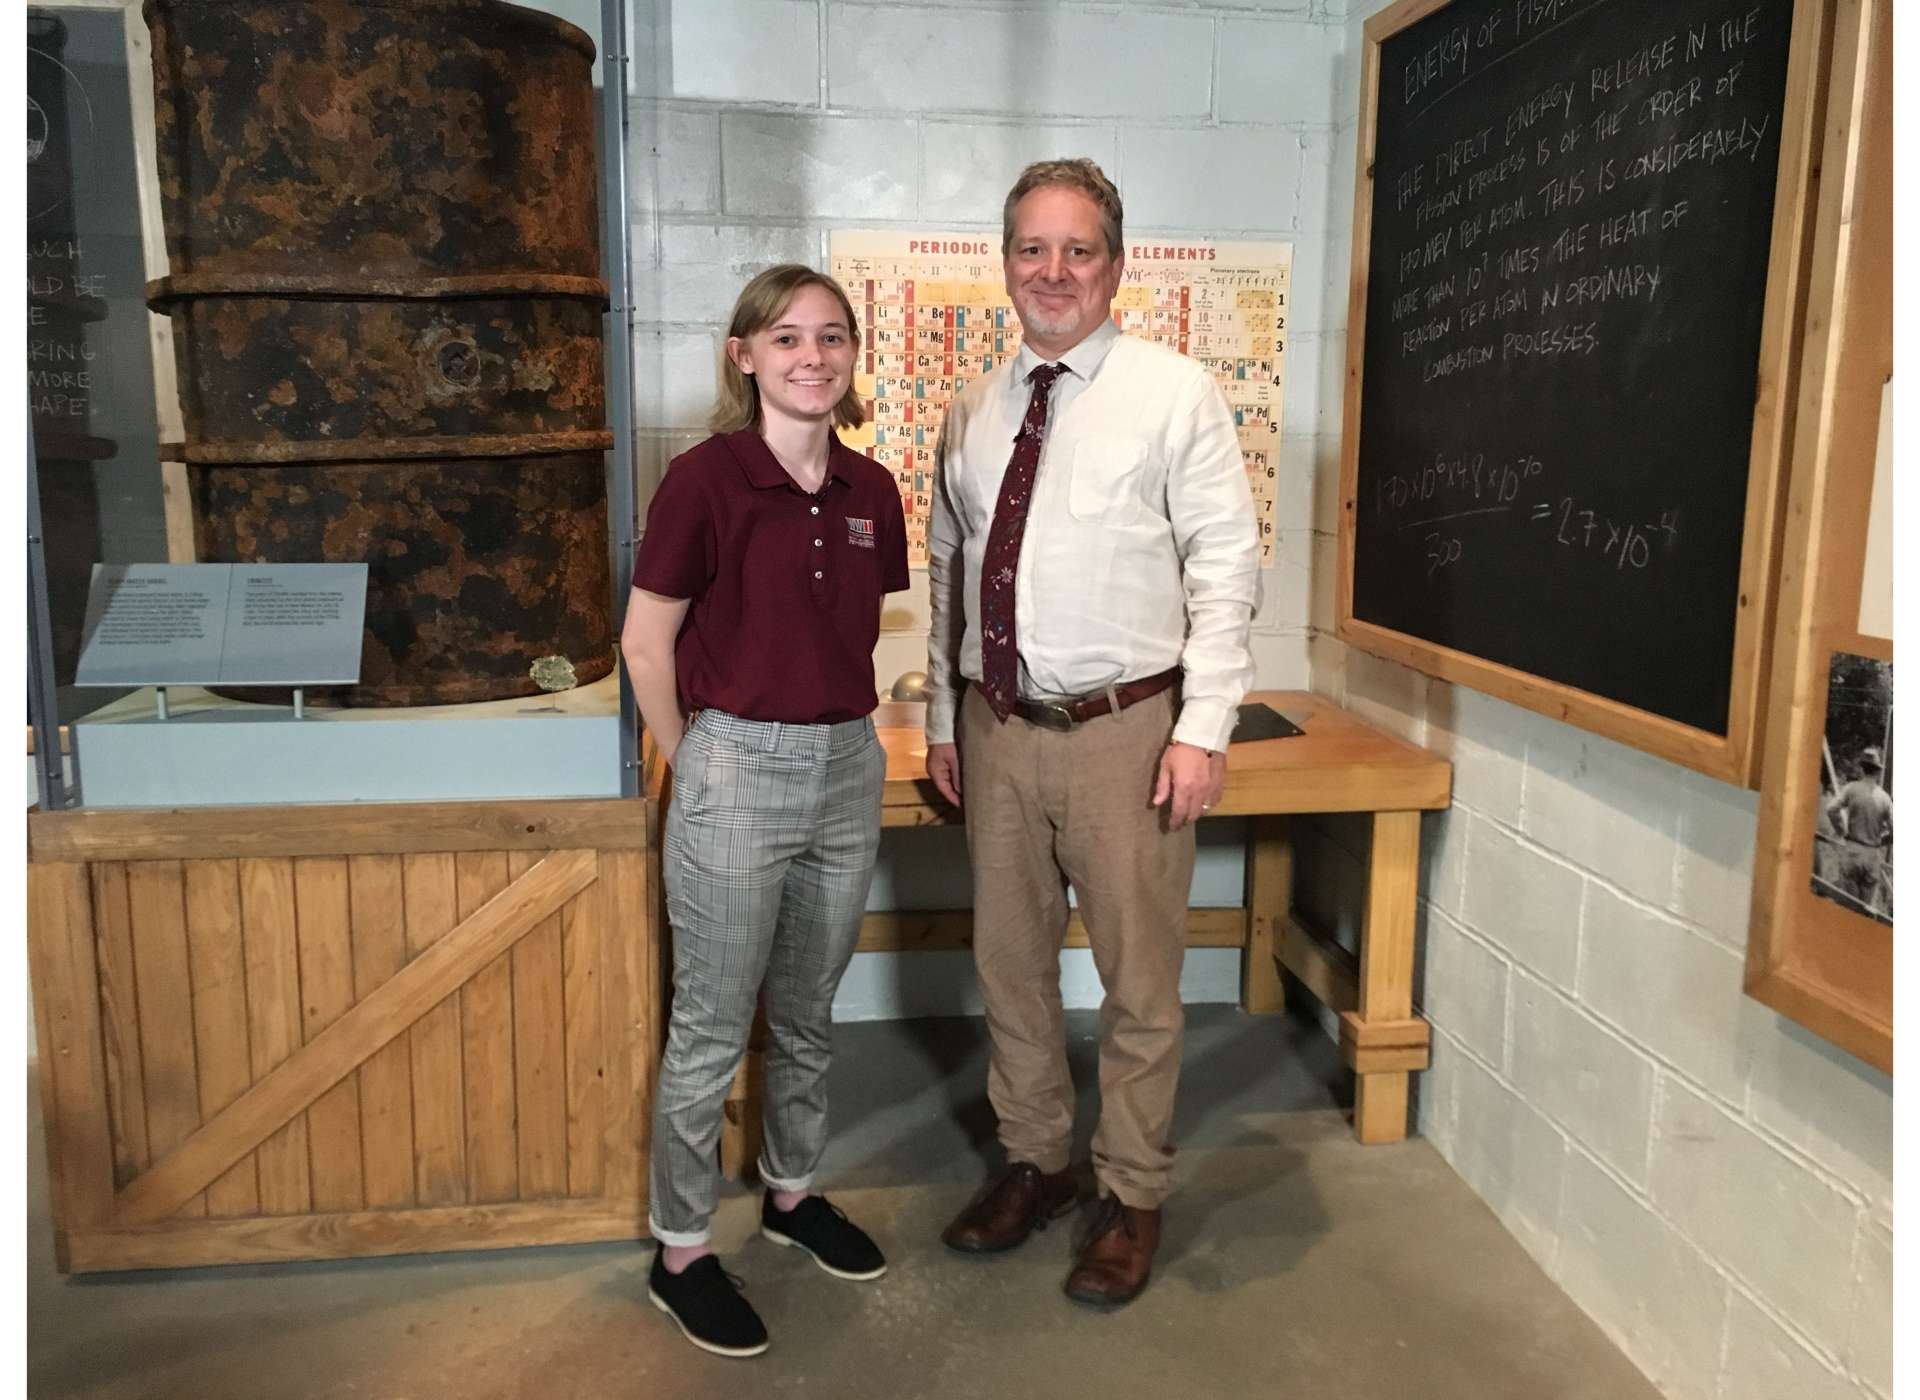 STEM specialist Rob Wallace reviews the early history of nuclear science with student reporter Julia.